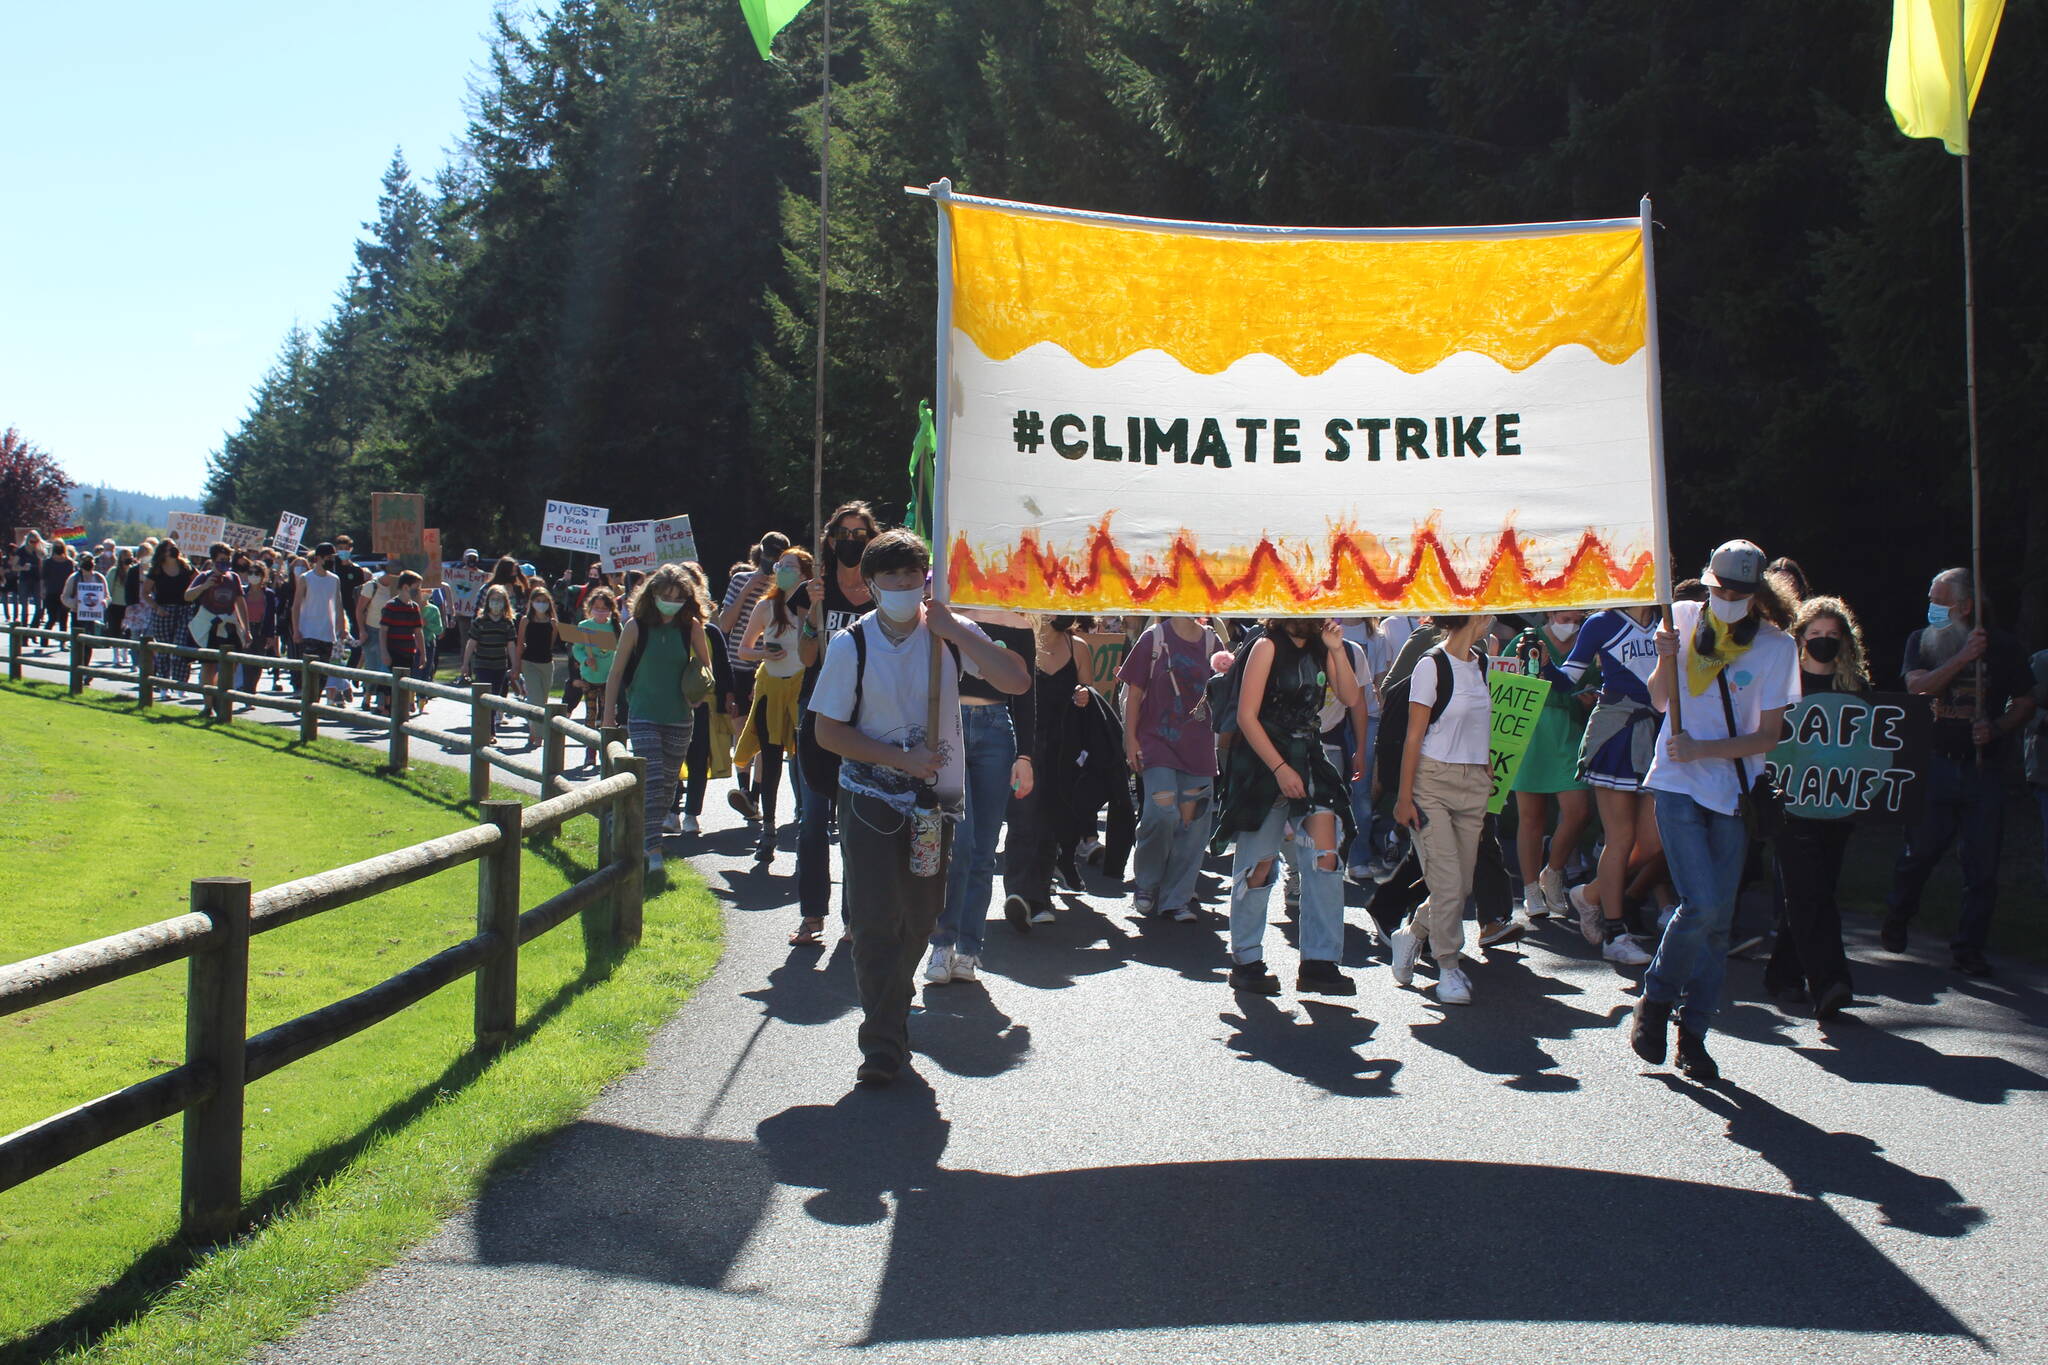 Photo by Karina Andrew/Whidbey News-Times
Students and community members march through Castle Park to demand climate justice.